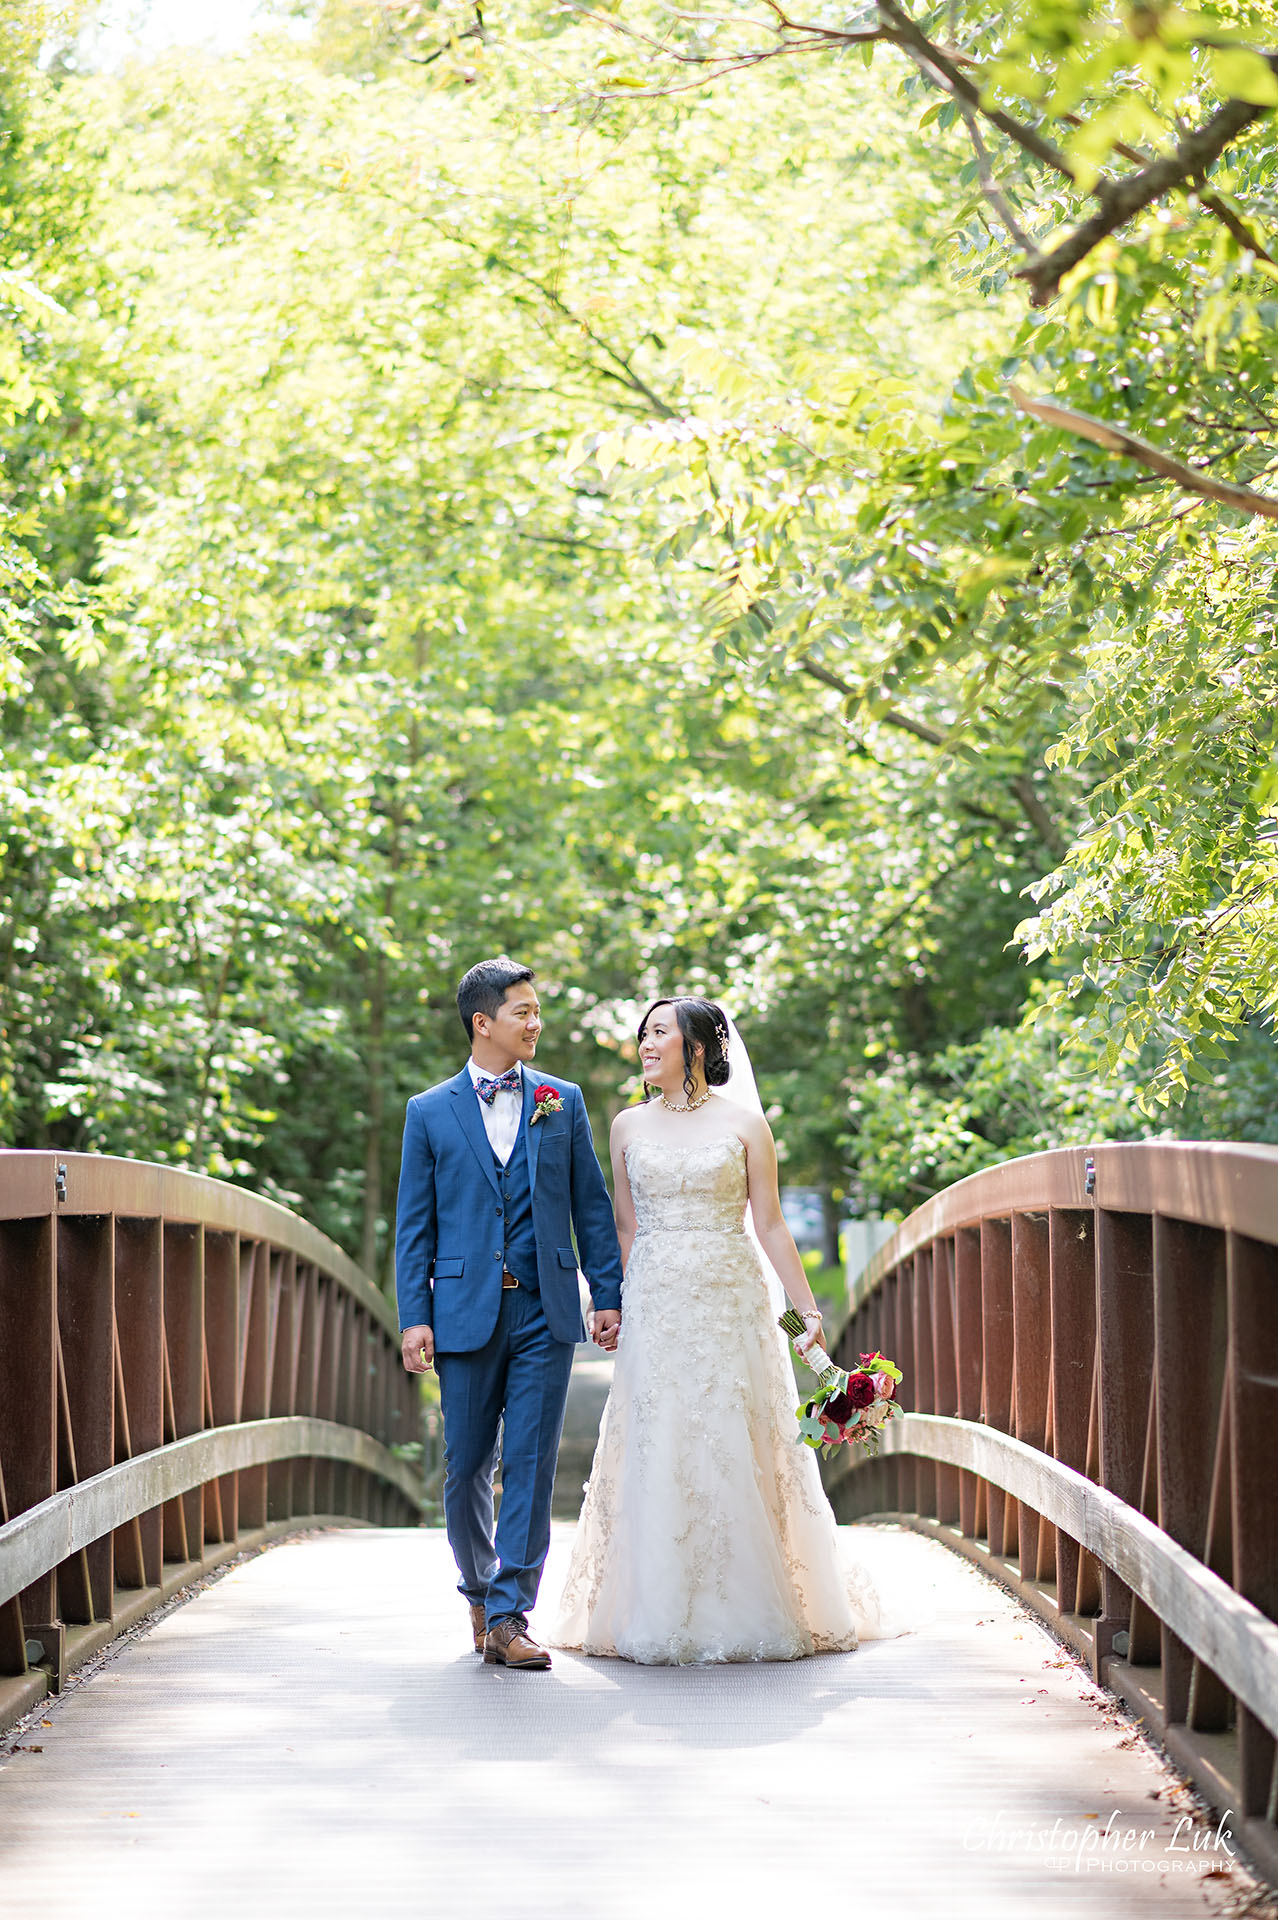 Christopher Luk Toronto Wedding Photographer Bridle Trail Baptist Church Unionville Main Street Crystal Fountain Event Venue Bride Groom Natural Photojournalistic Candid Creative Portrait Session Pictures Forest Trail Walkway Bridge Park Holding Hands Walking Together